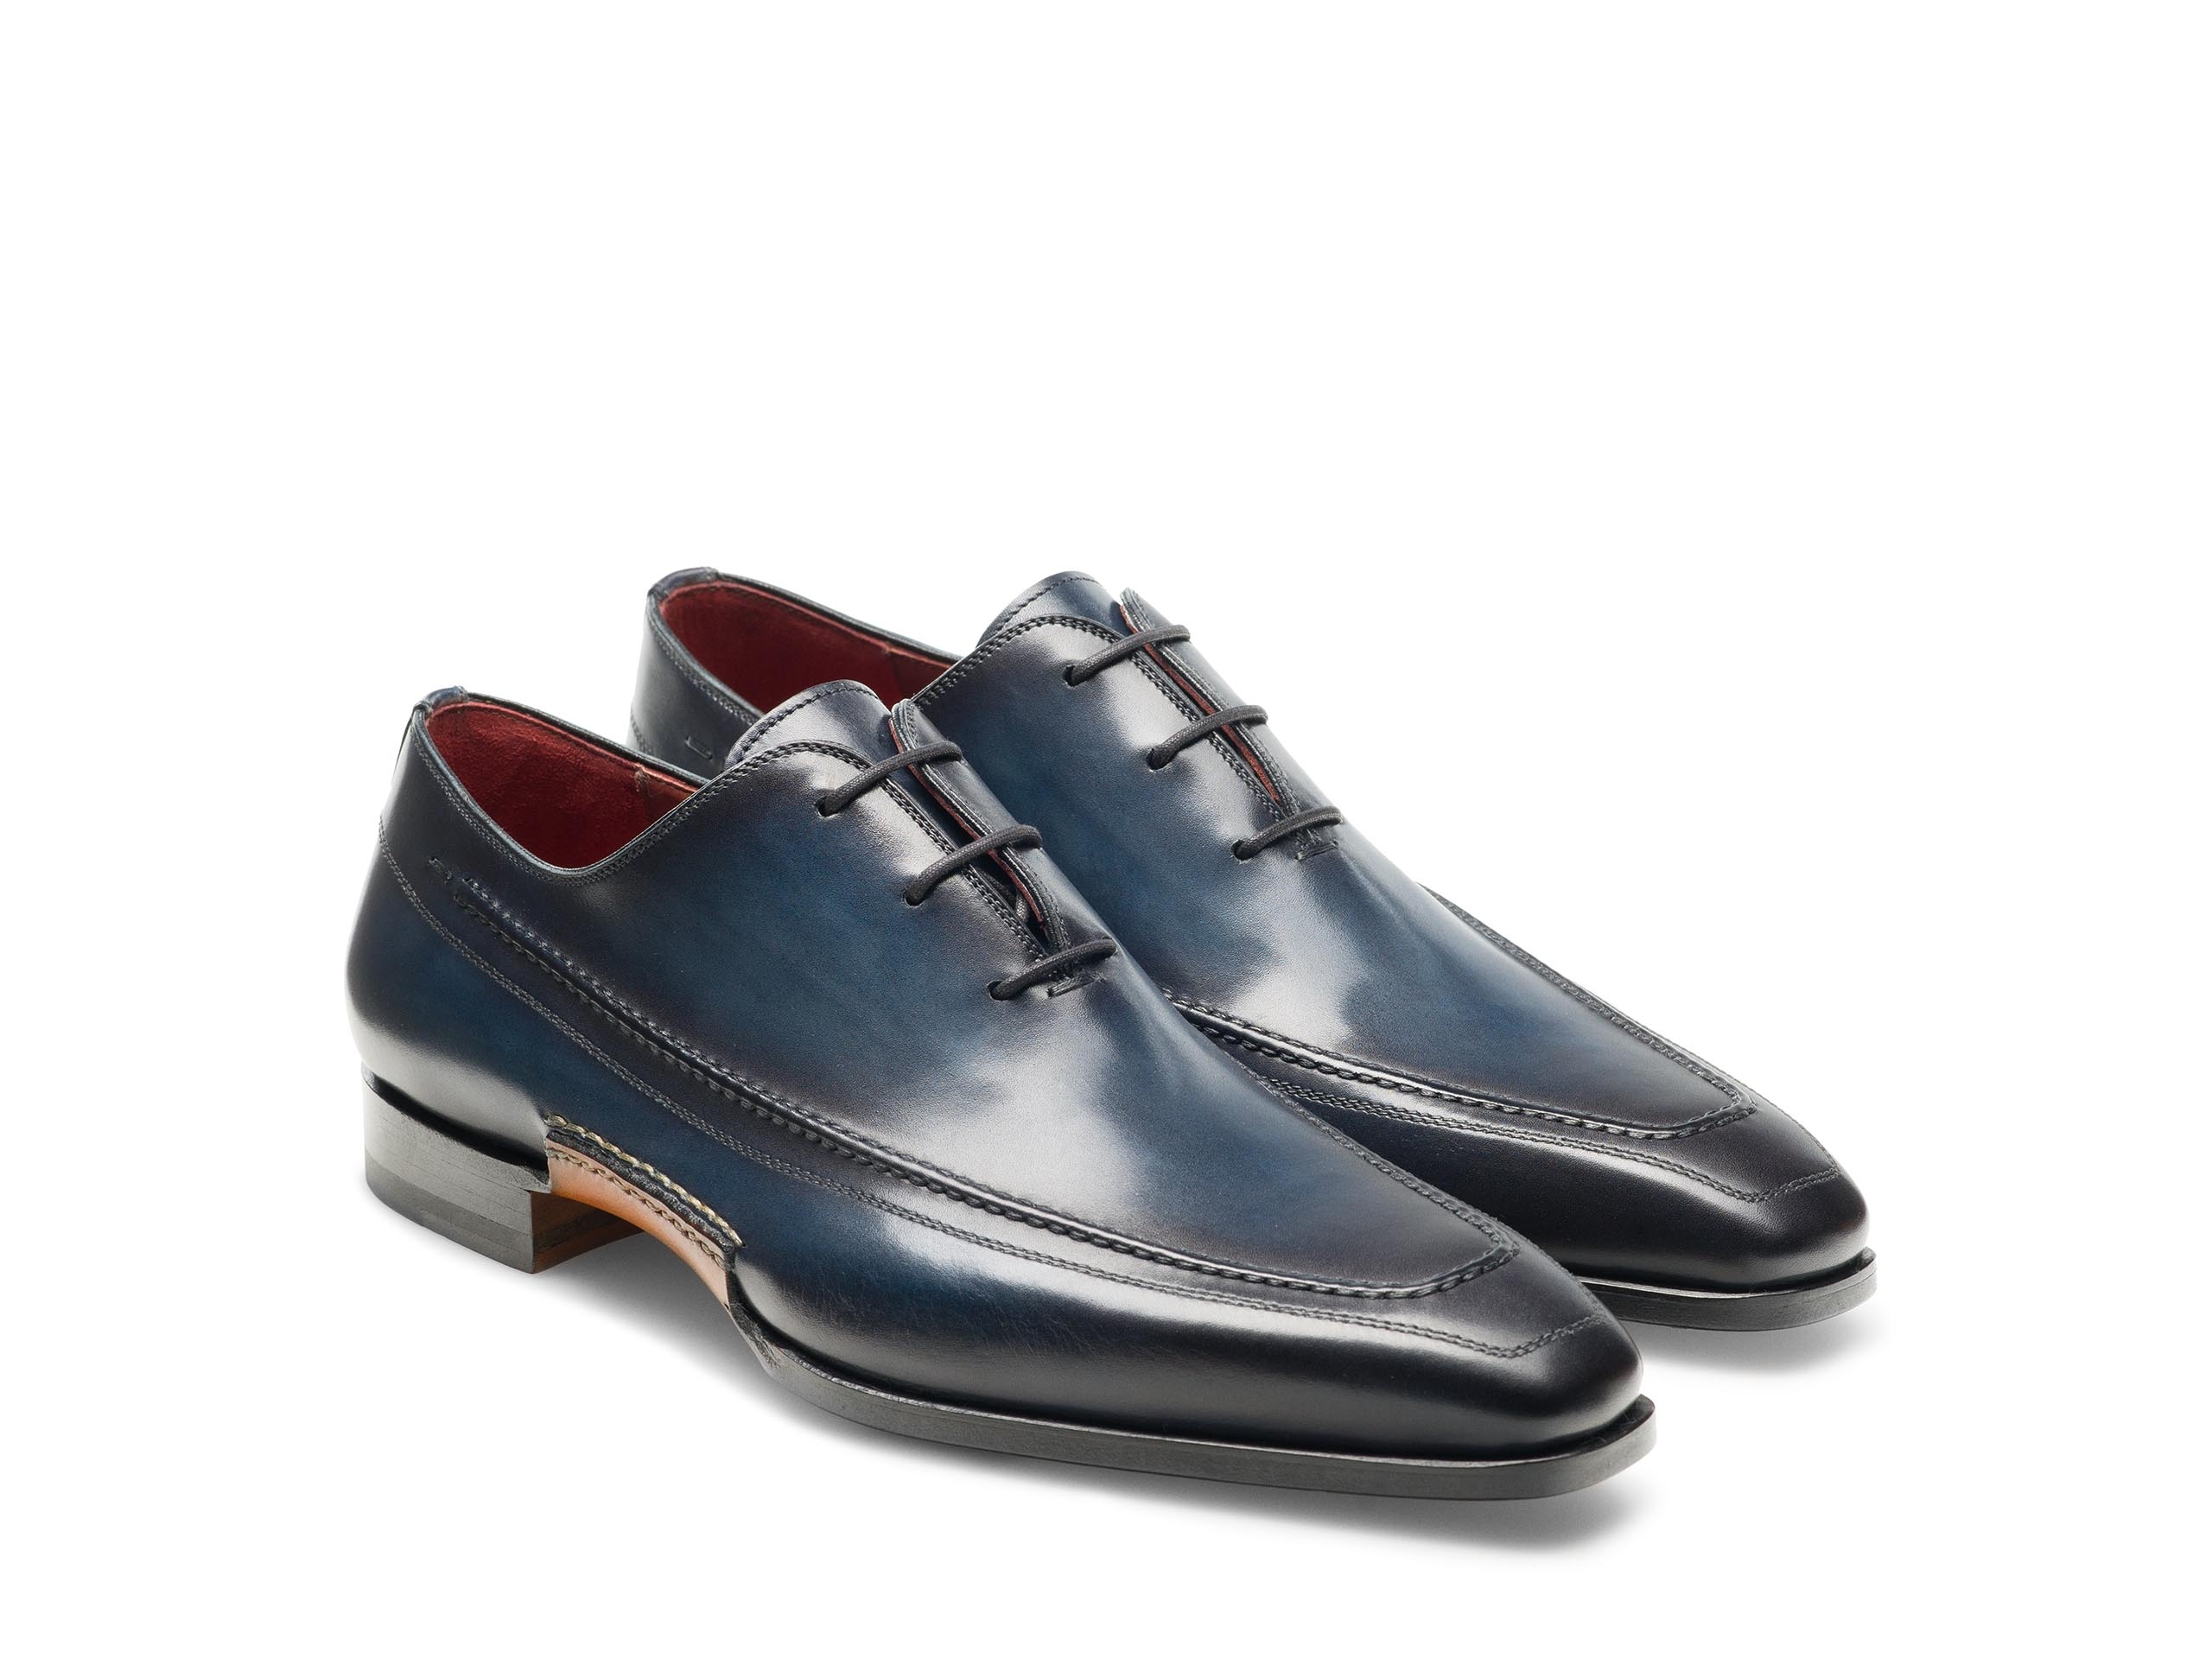 Pair of the Andreo Navy